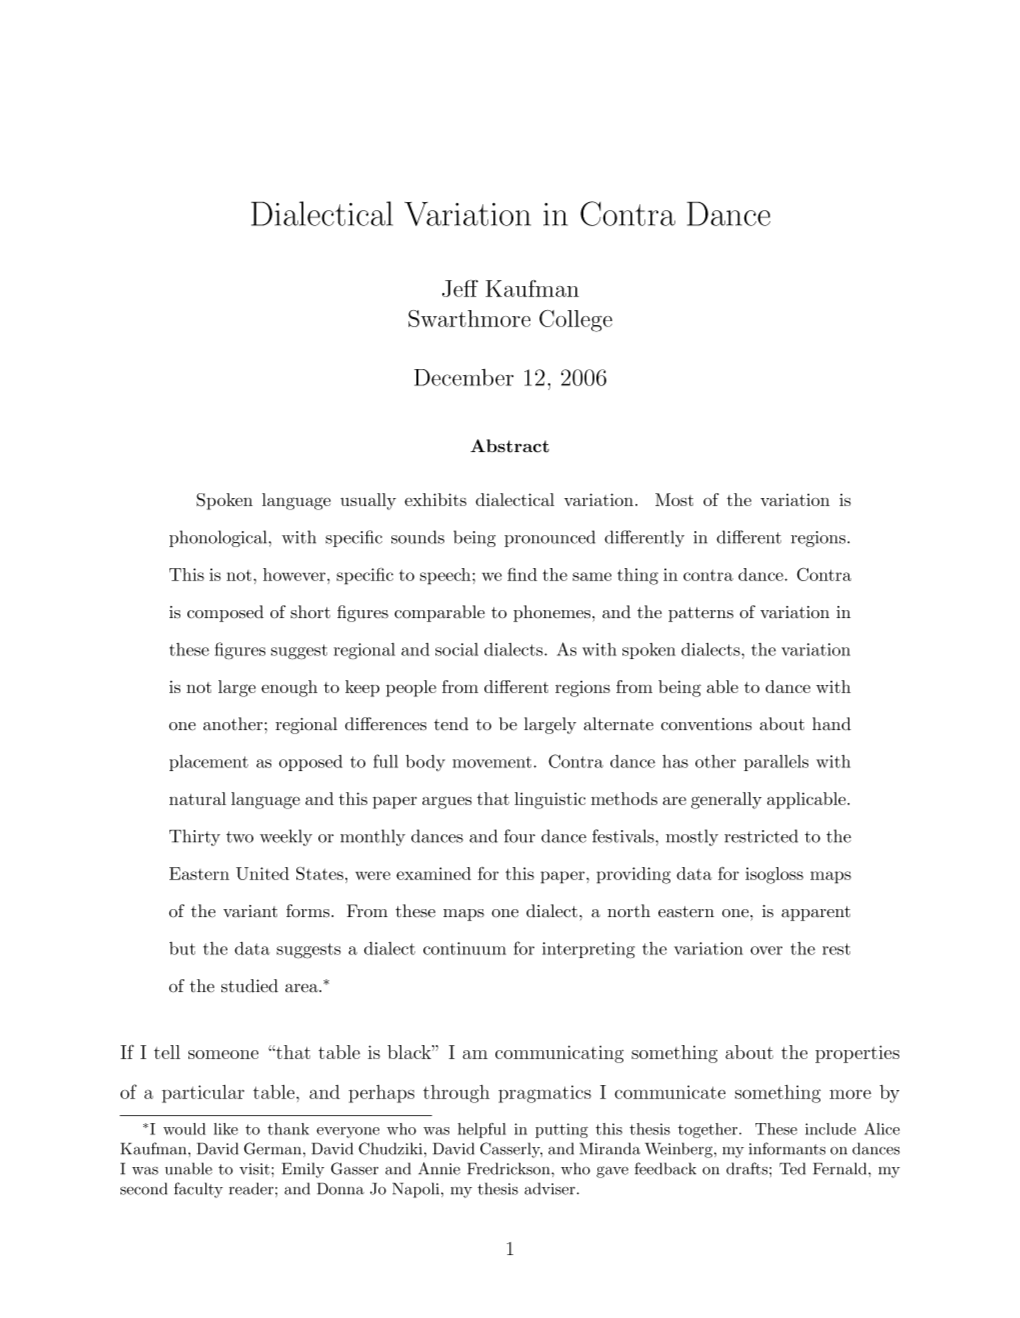 Dialectical Variation in Contra Dance